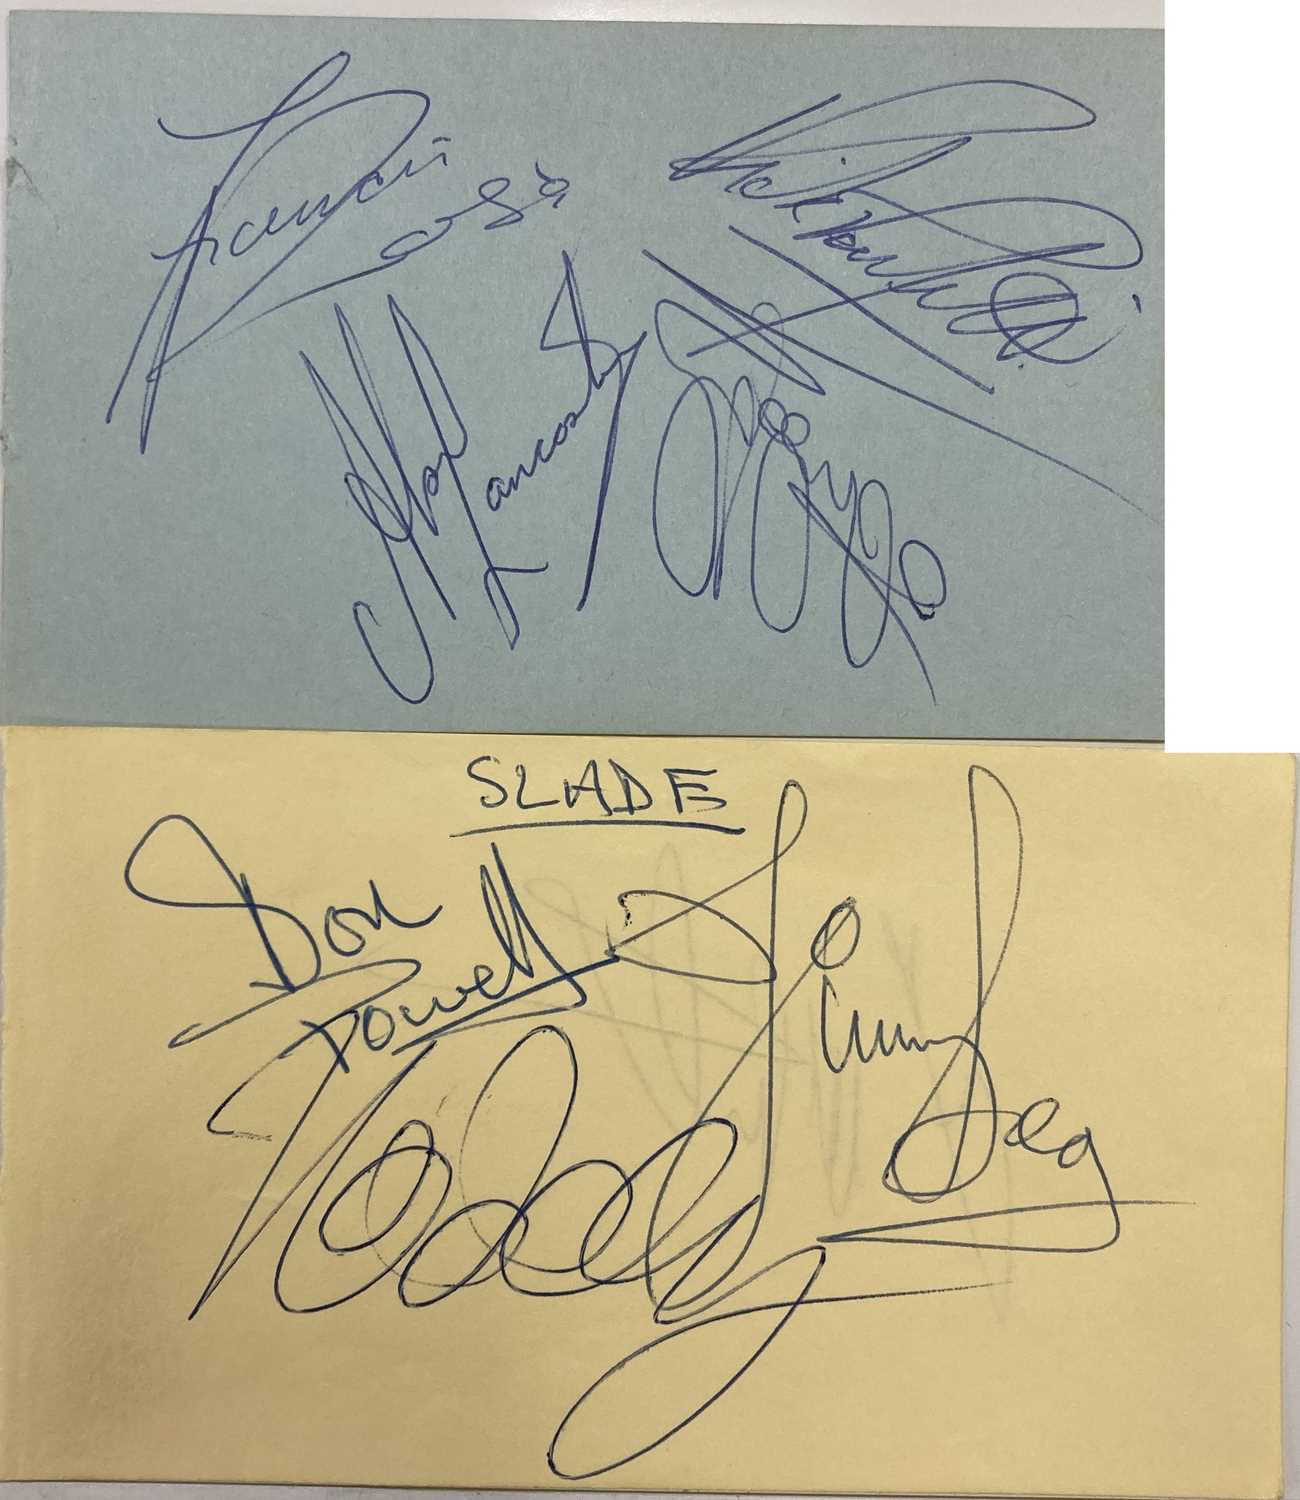 Lot 241 Status Quo And Slade Autographs